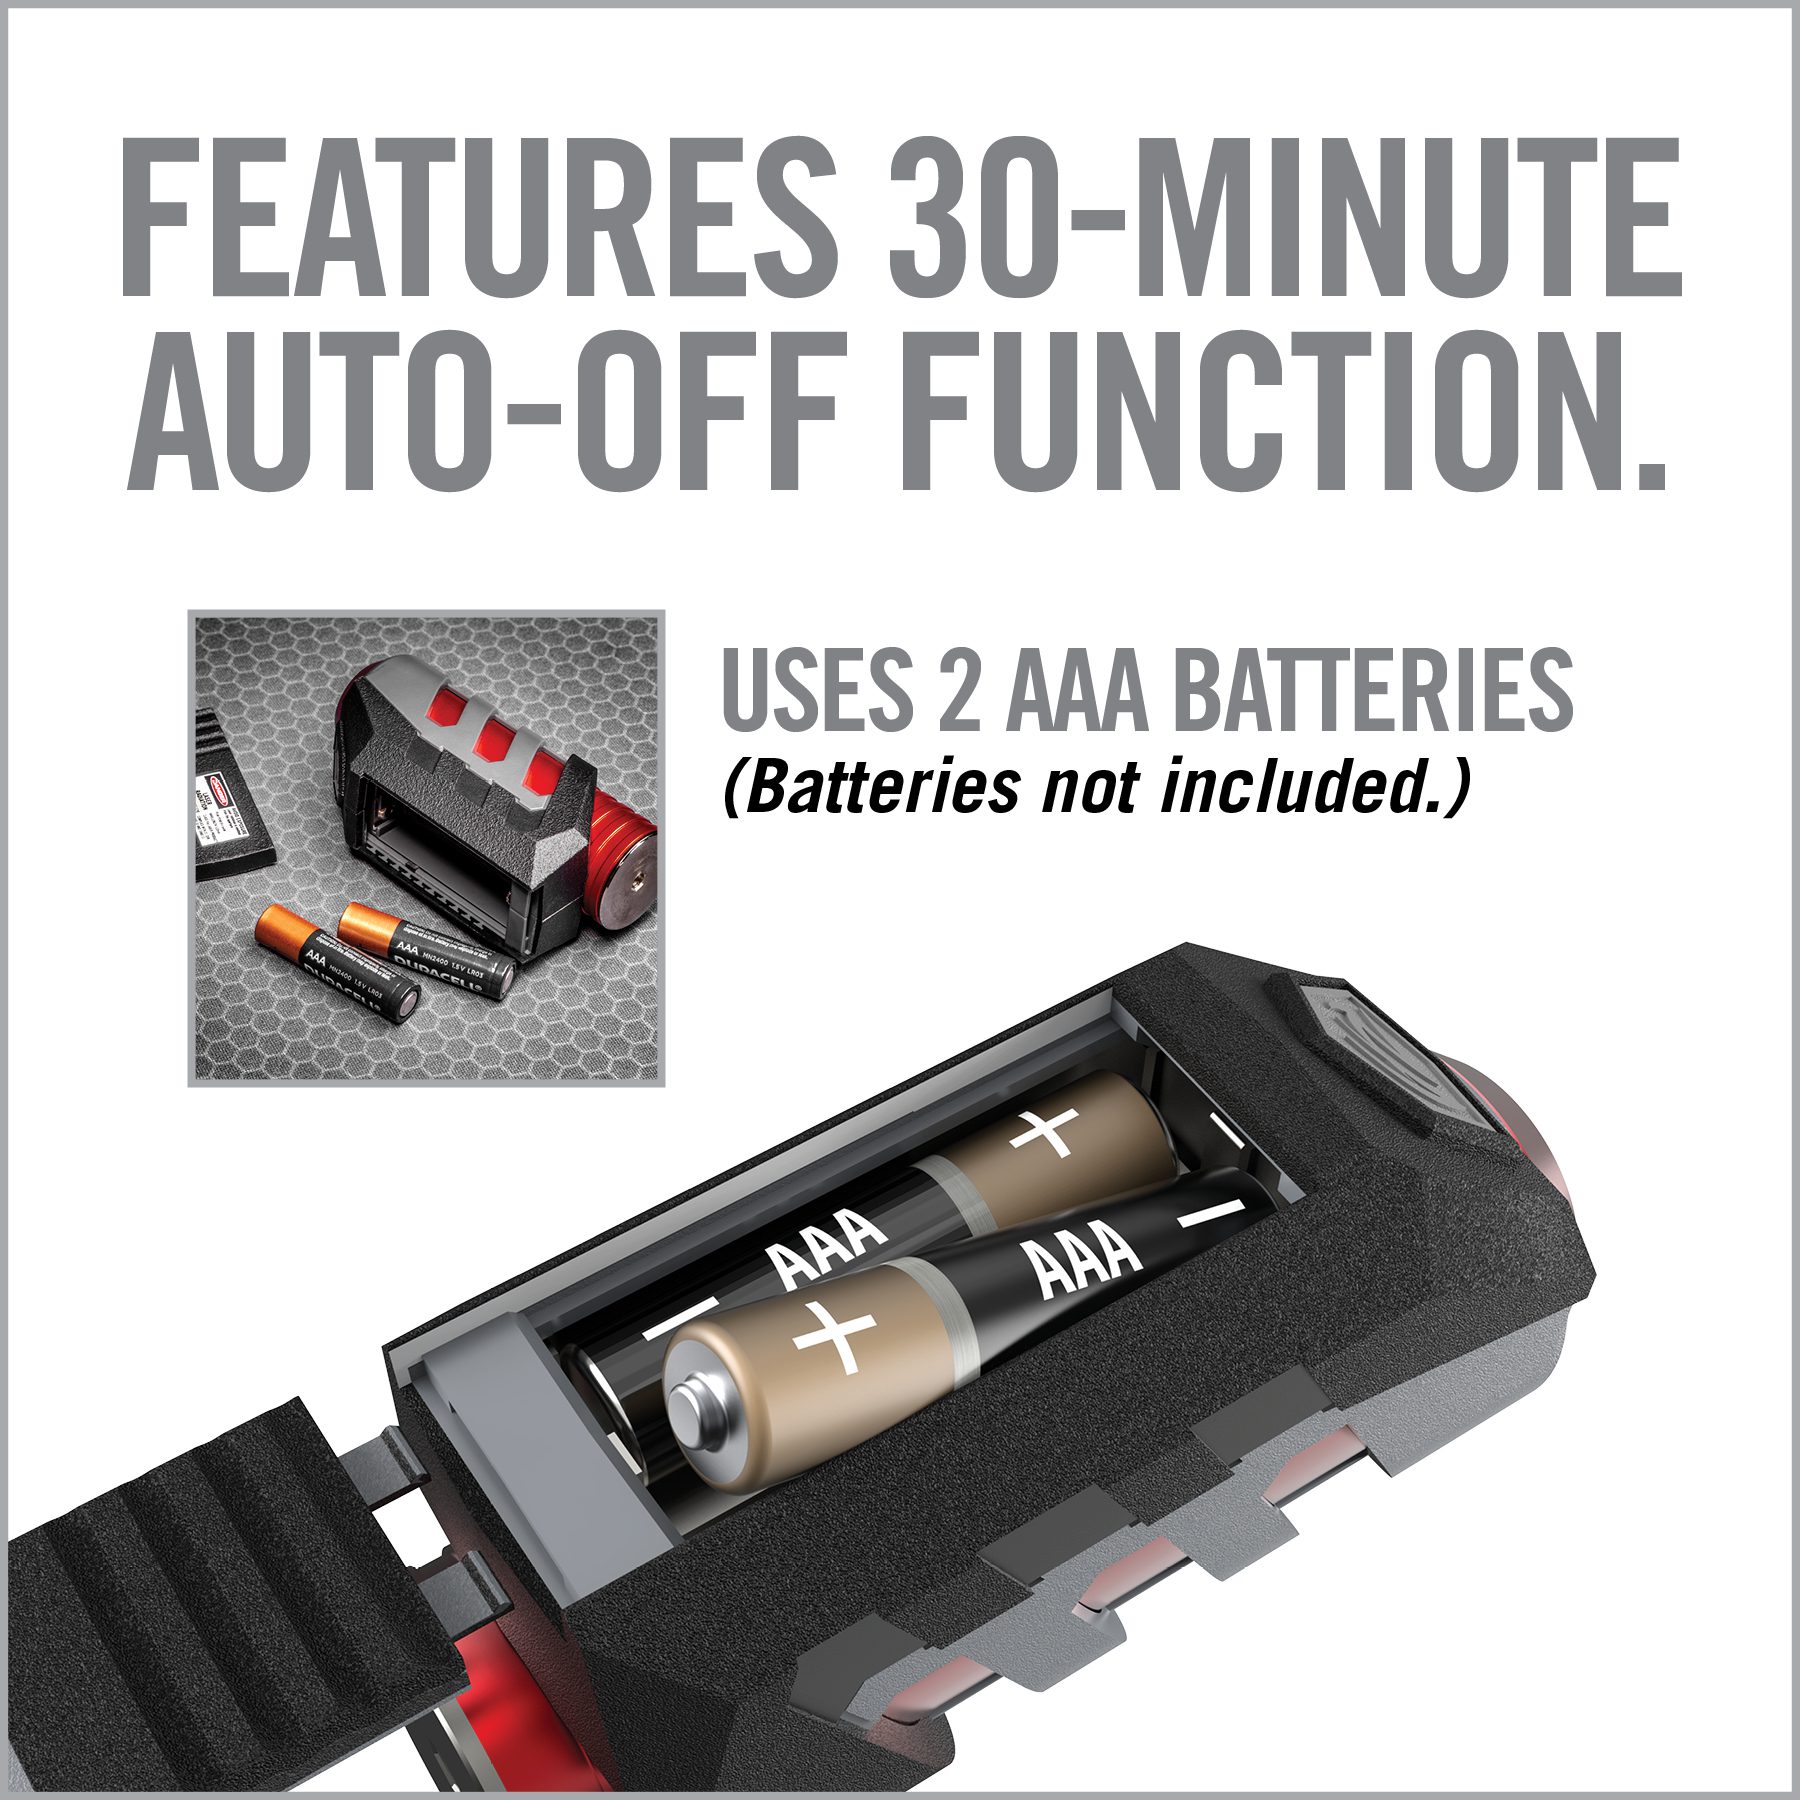 an ad for batteries with instructions on how to use them